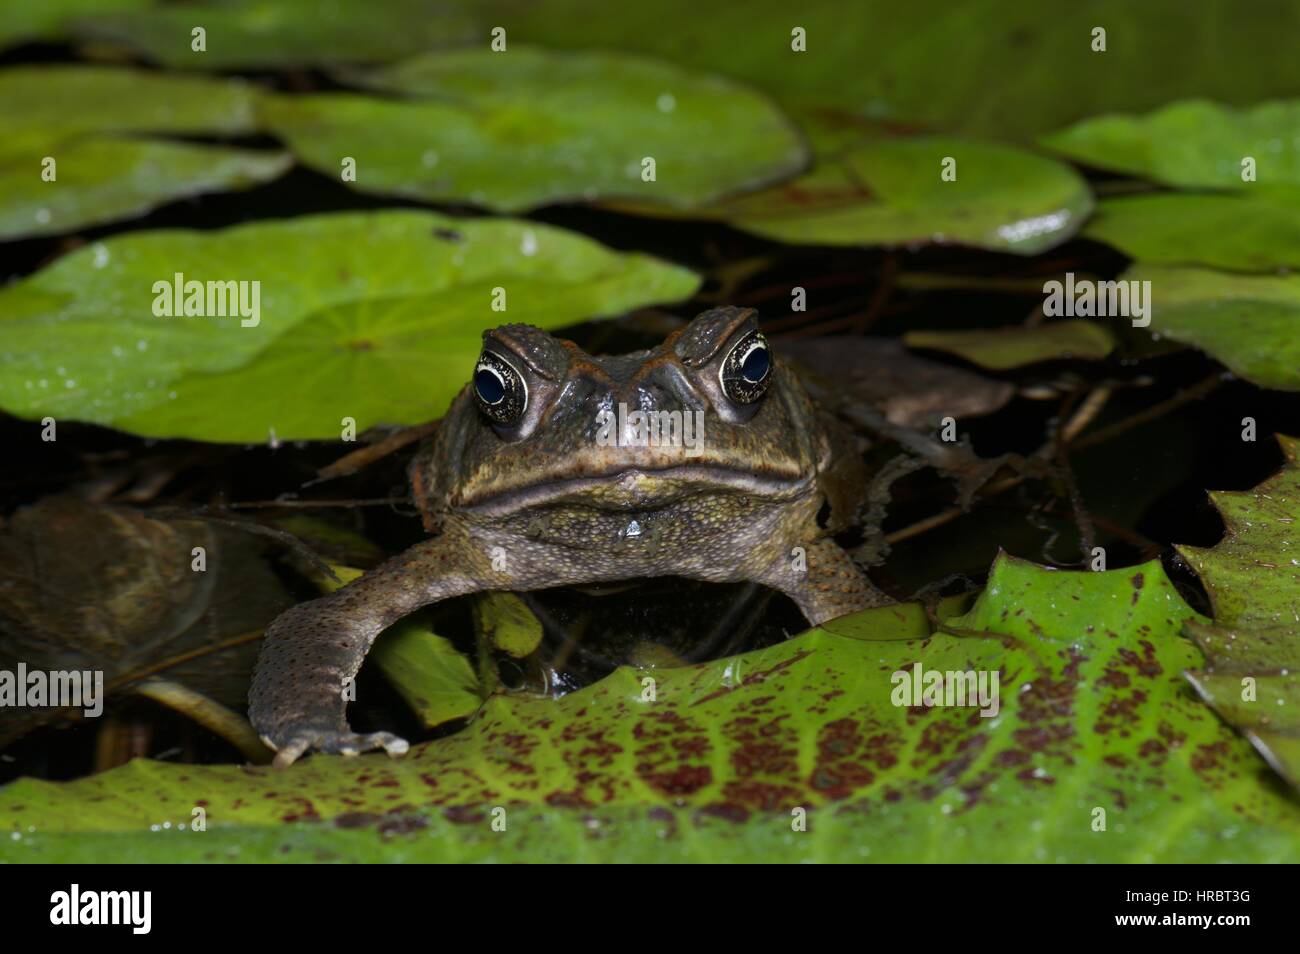 A Cane Toad (Rhinella marina) floating in a pond with lily pads in El Valle de Antón, Coclé, Panama Stock Photo